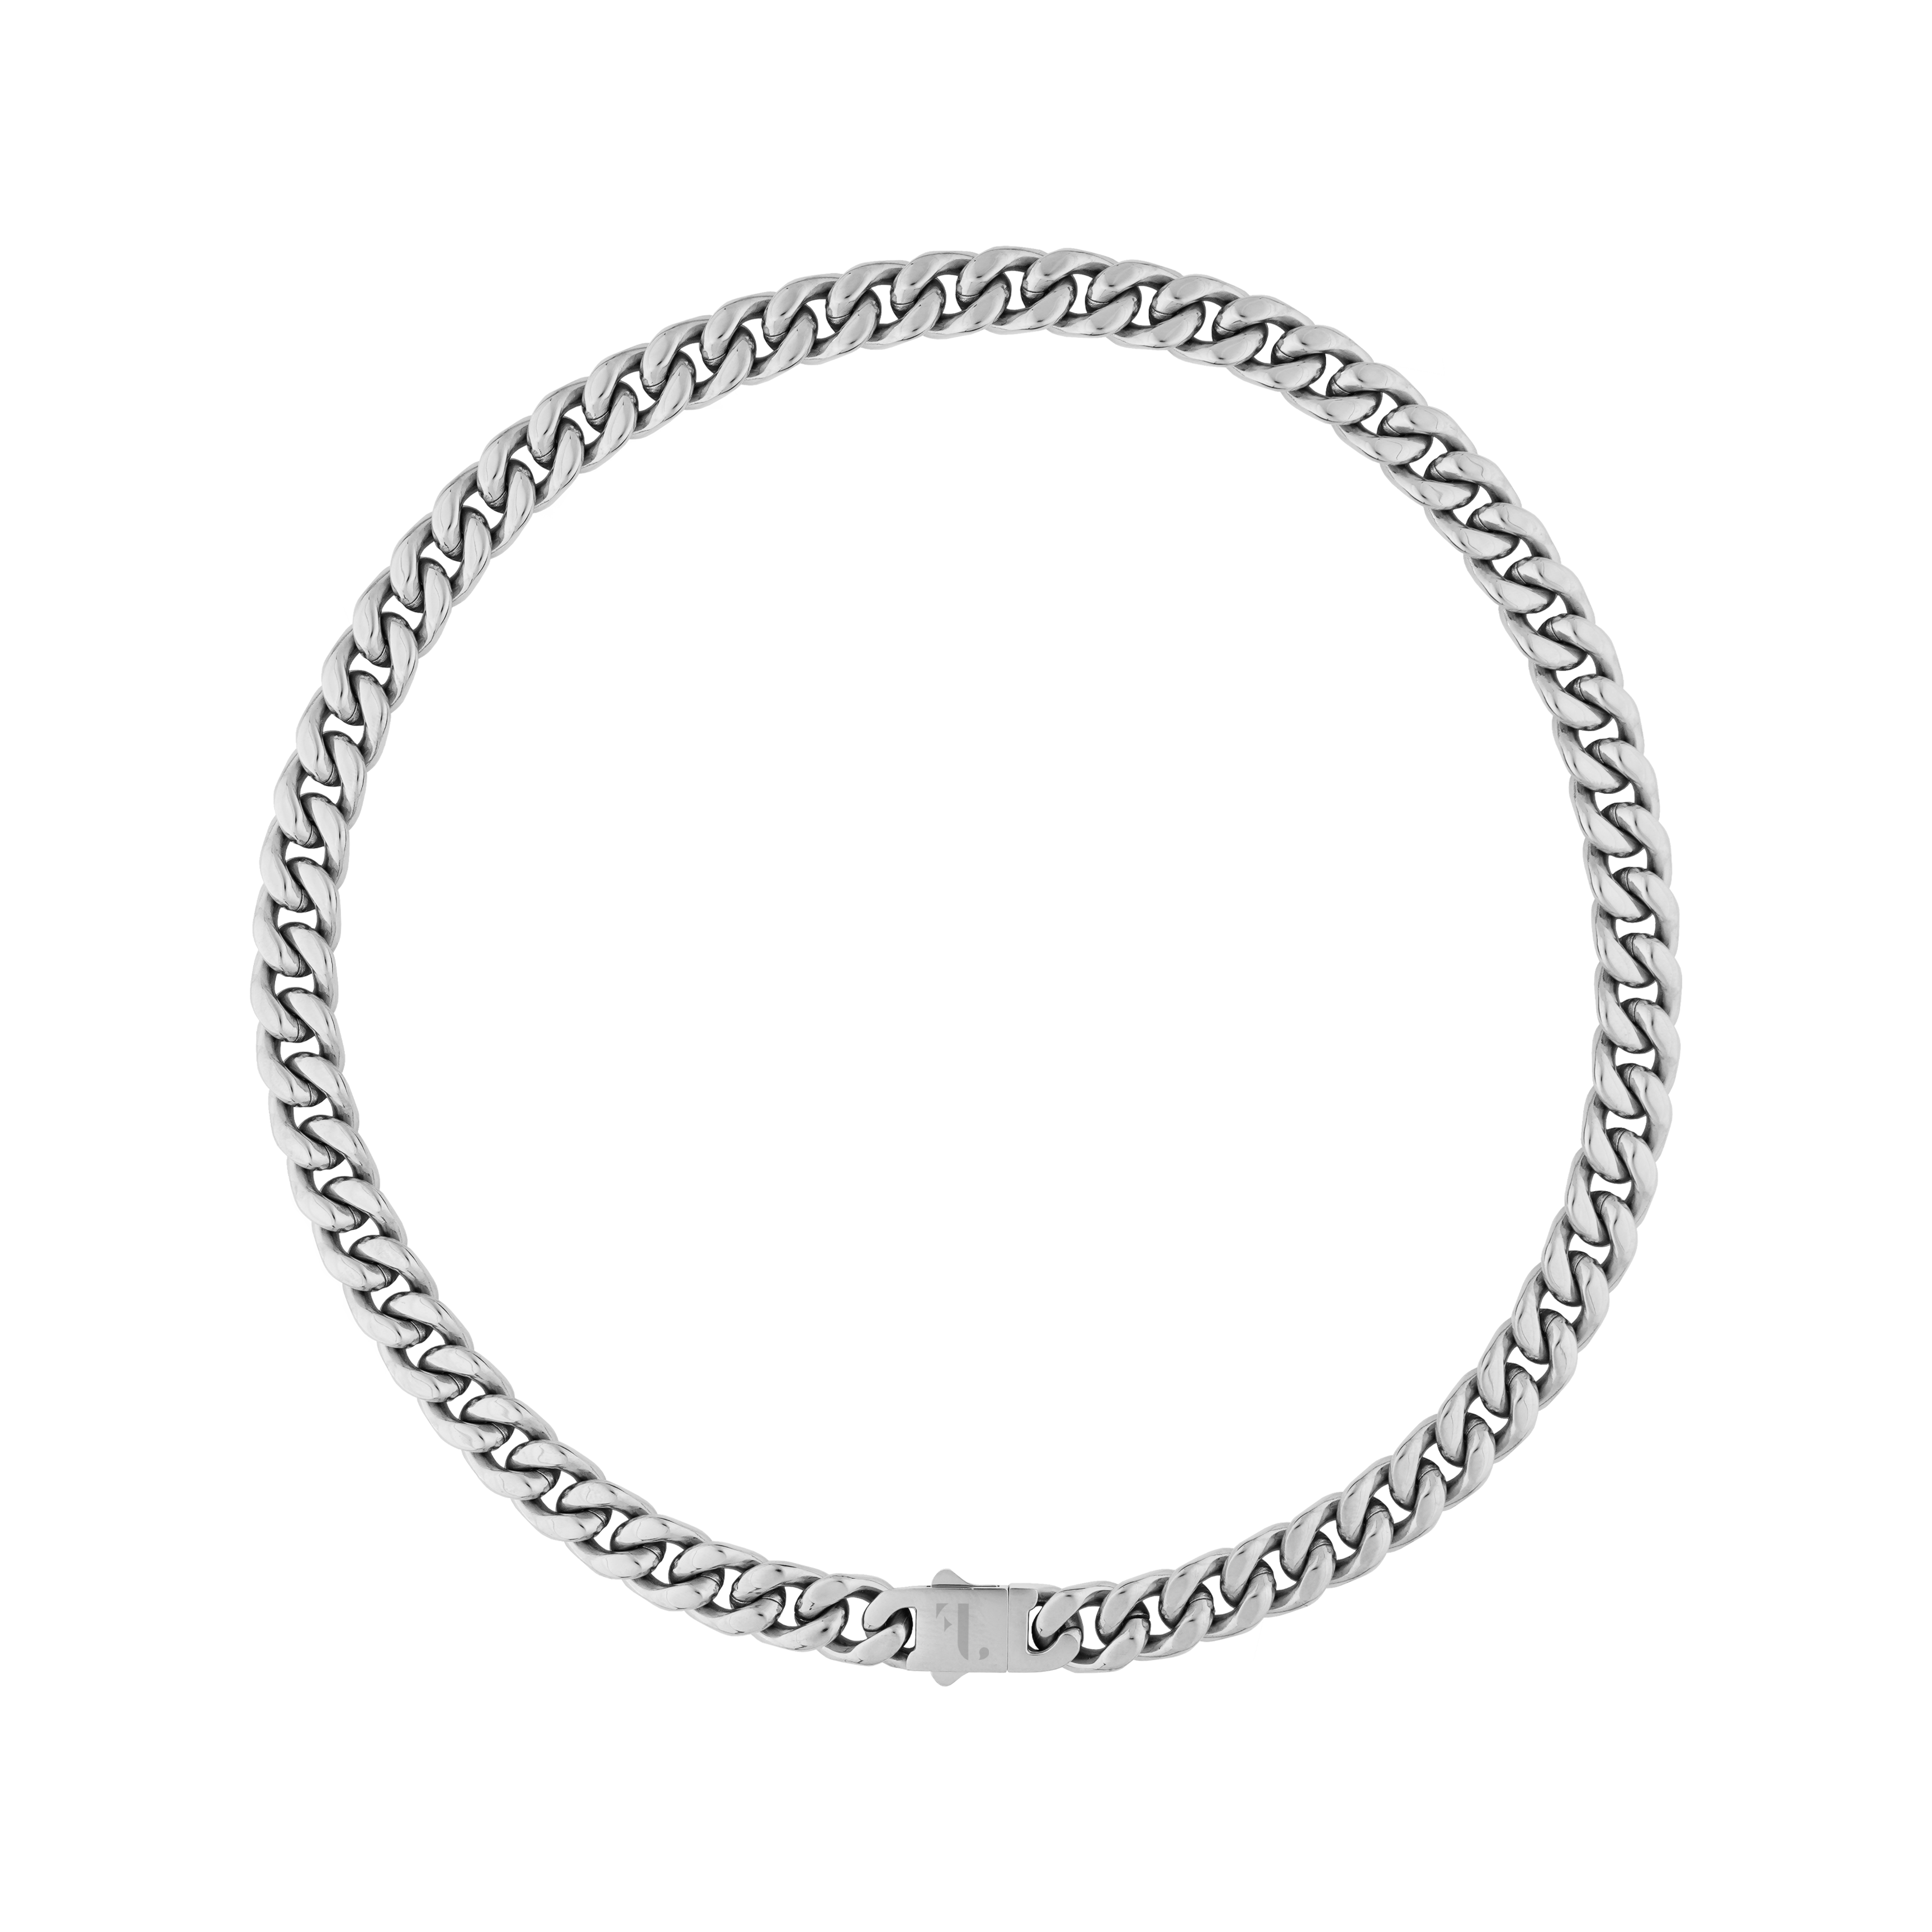 Cass men's necklace by Five Jwlry, designed with a 10mm tightly woven Cuban link chain in a silver hue, crafted from water-resistant 316L stainless steel. Available in sizes 40cm, 45cm, 50cm, 55cm and 60cm. Hypoallergenic and accompanied by a 2-year warranty.